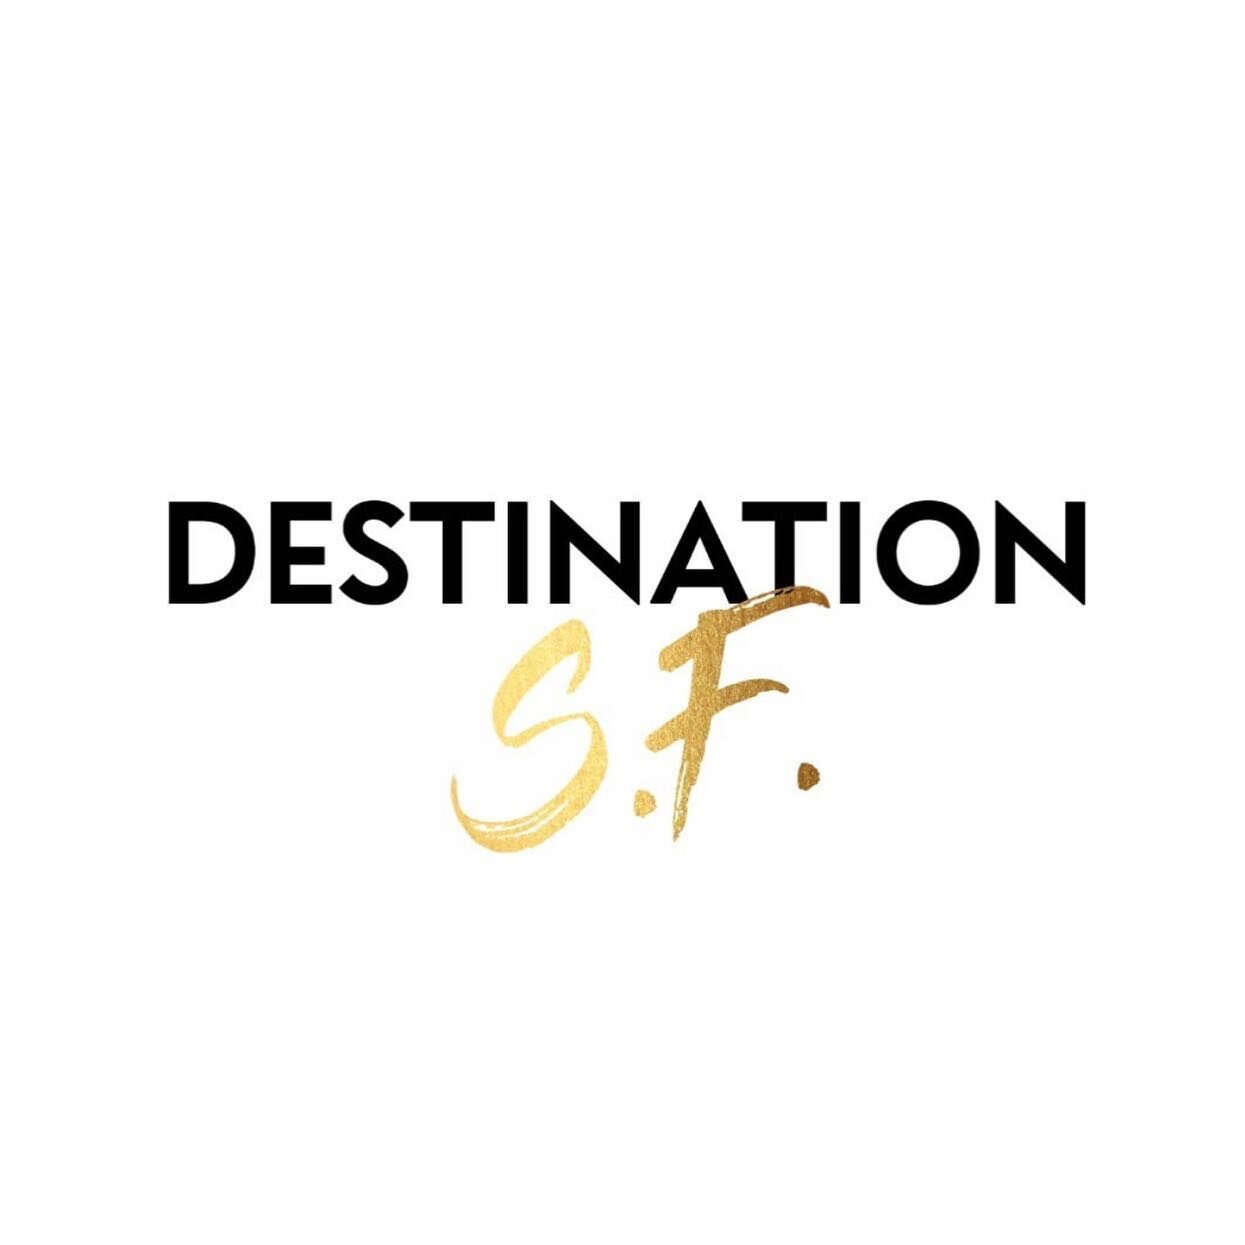 Mark your calendars because Burkevents is making its television debut! Tune in to KPIX @kpixtv, channel 5 (CBS-San Francisco) this Saturday, 8/5/23 at 3pm PST for the premier episode of Destination SF, Season 2. 

This exciting show highlights local 